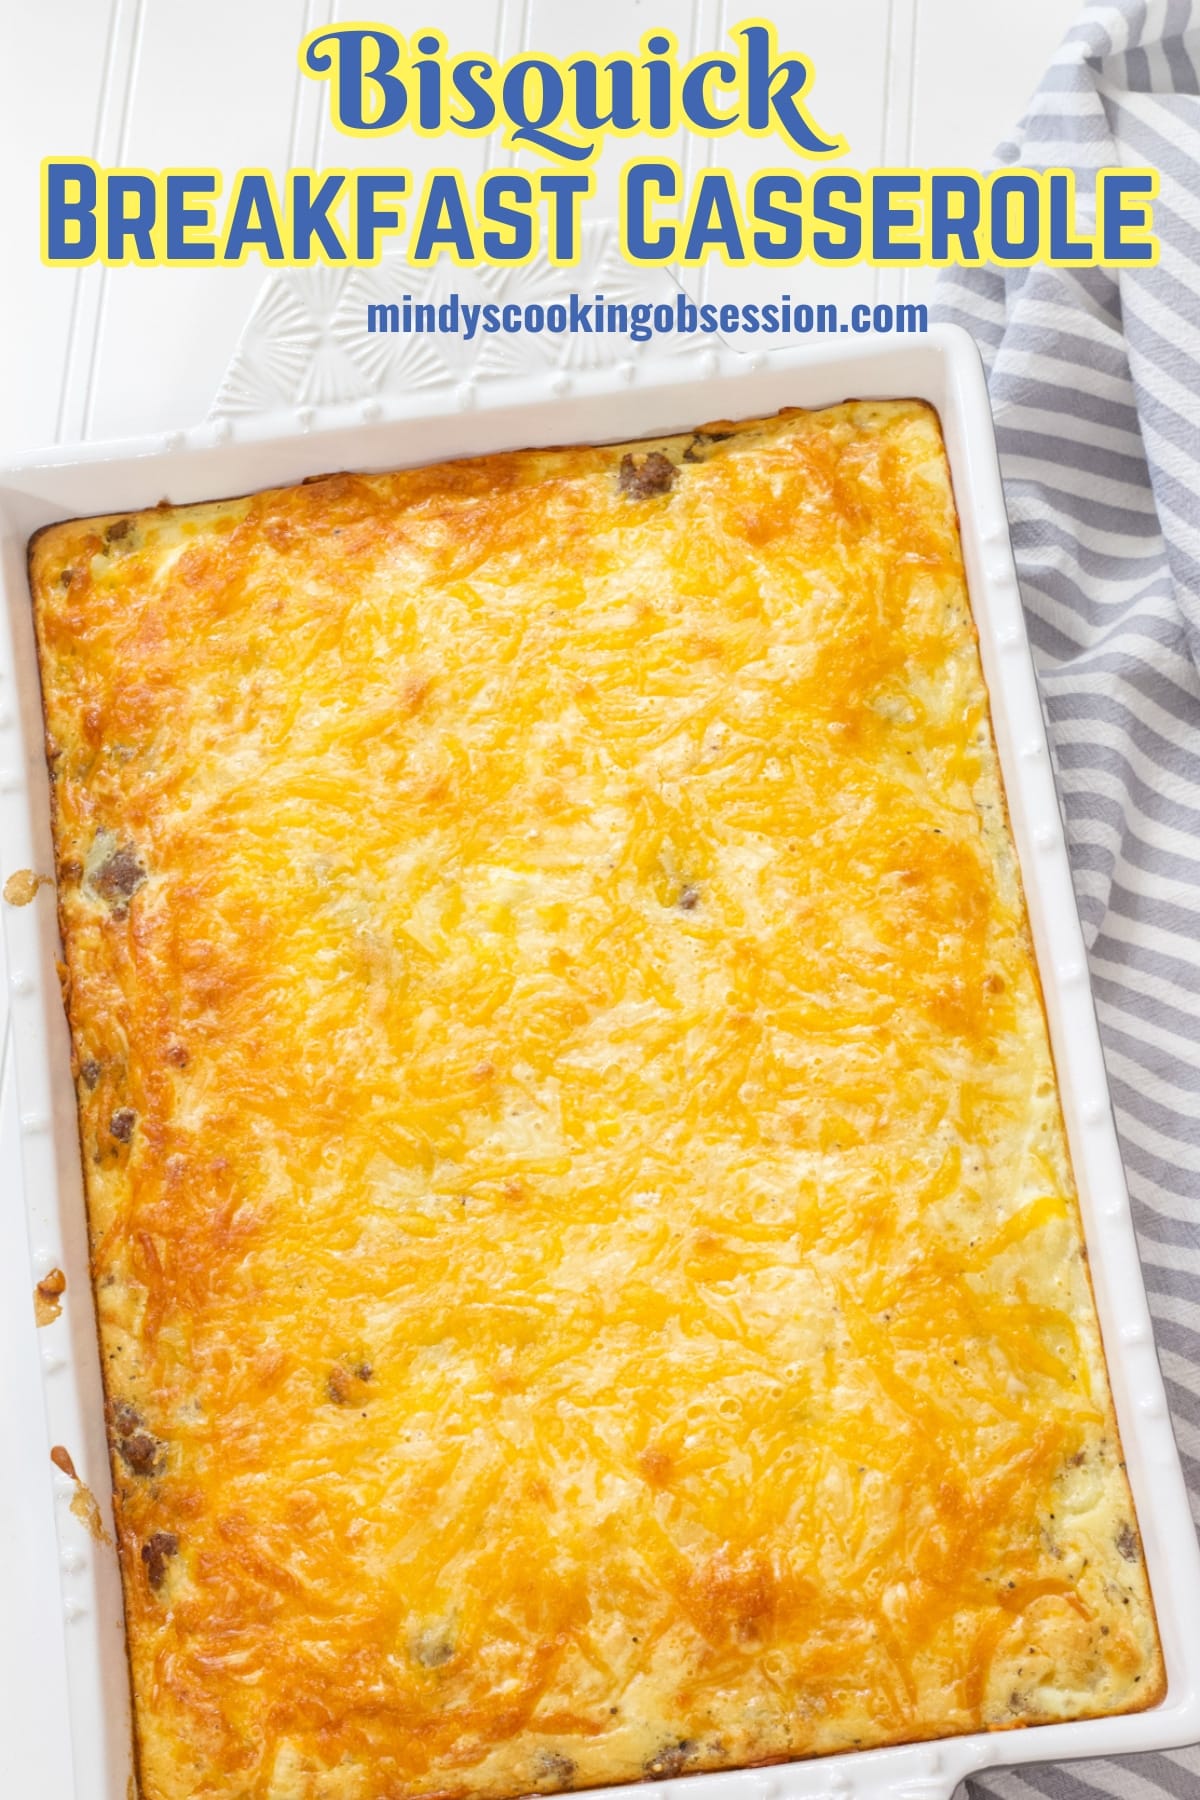 Crowd-pleasing Easy Bisquick Sausage Breakfast Casserole recipe features pork sausage, hash browns, eggs, milk and cheese. A delicious harmony of flavors perfect for any morning! via @mindyscookingobsession